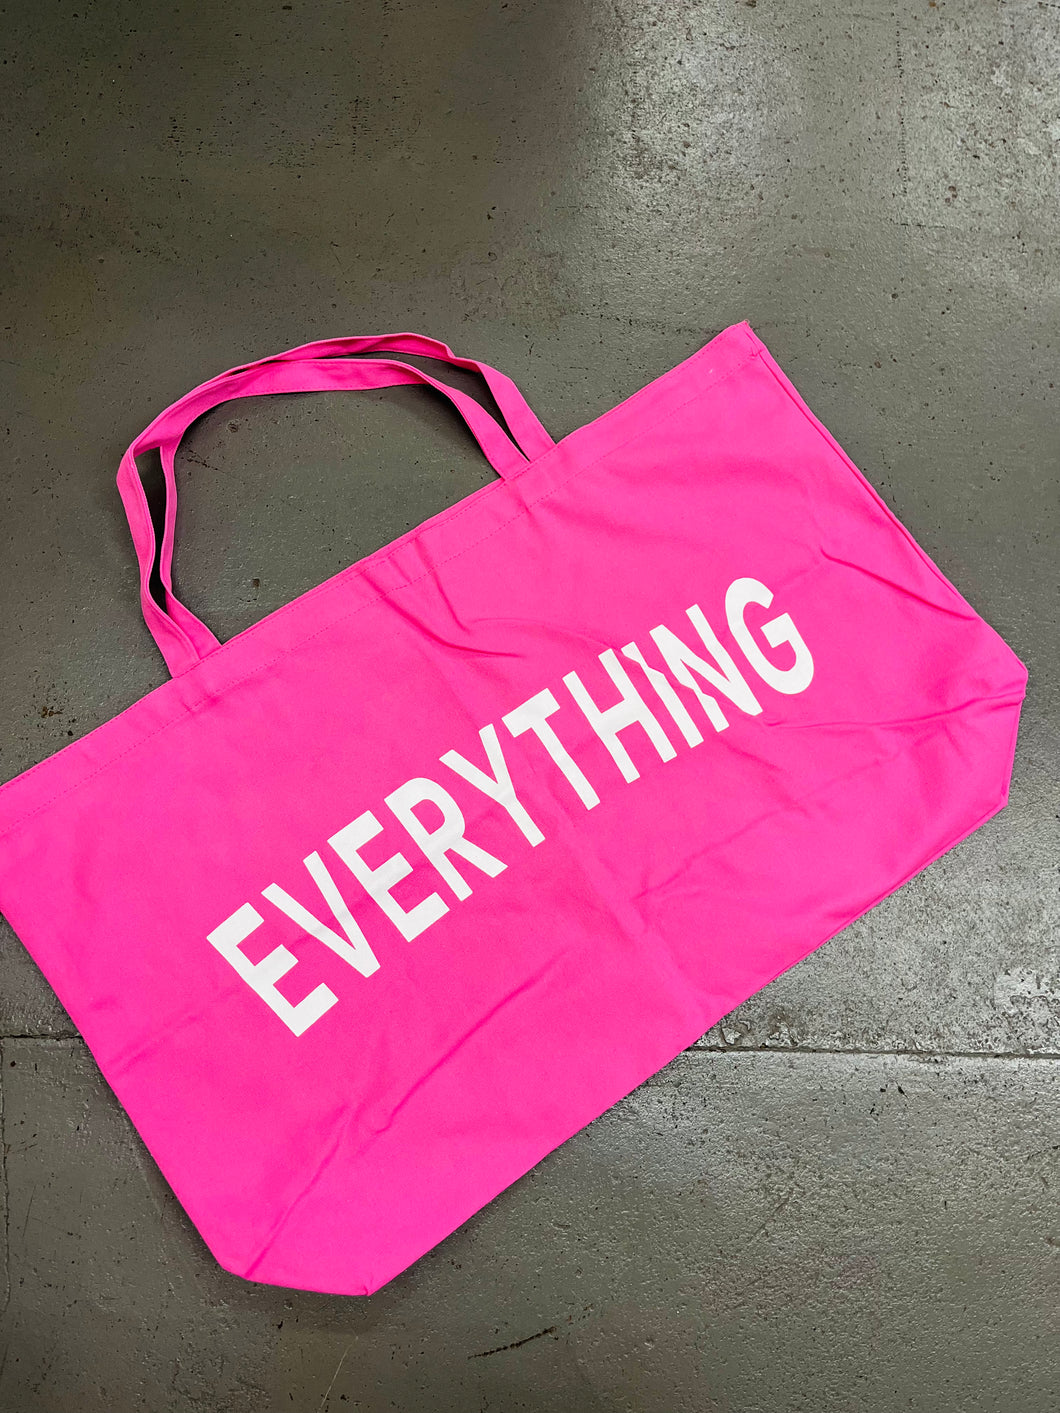 The EVERYTHING Tote